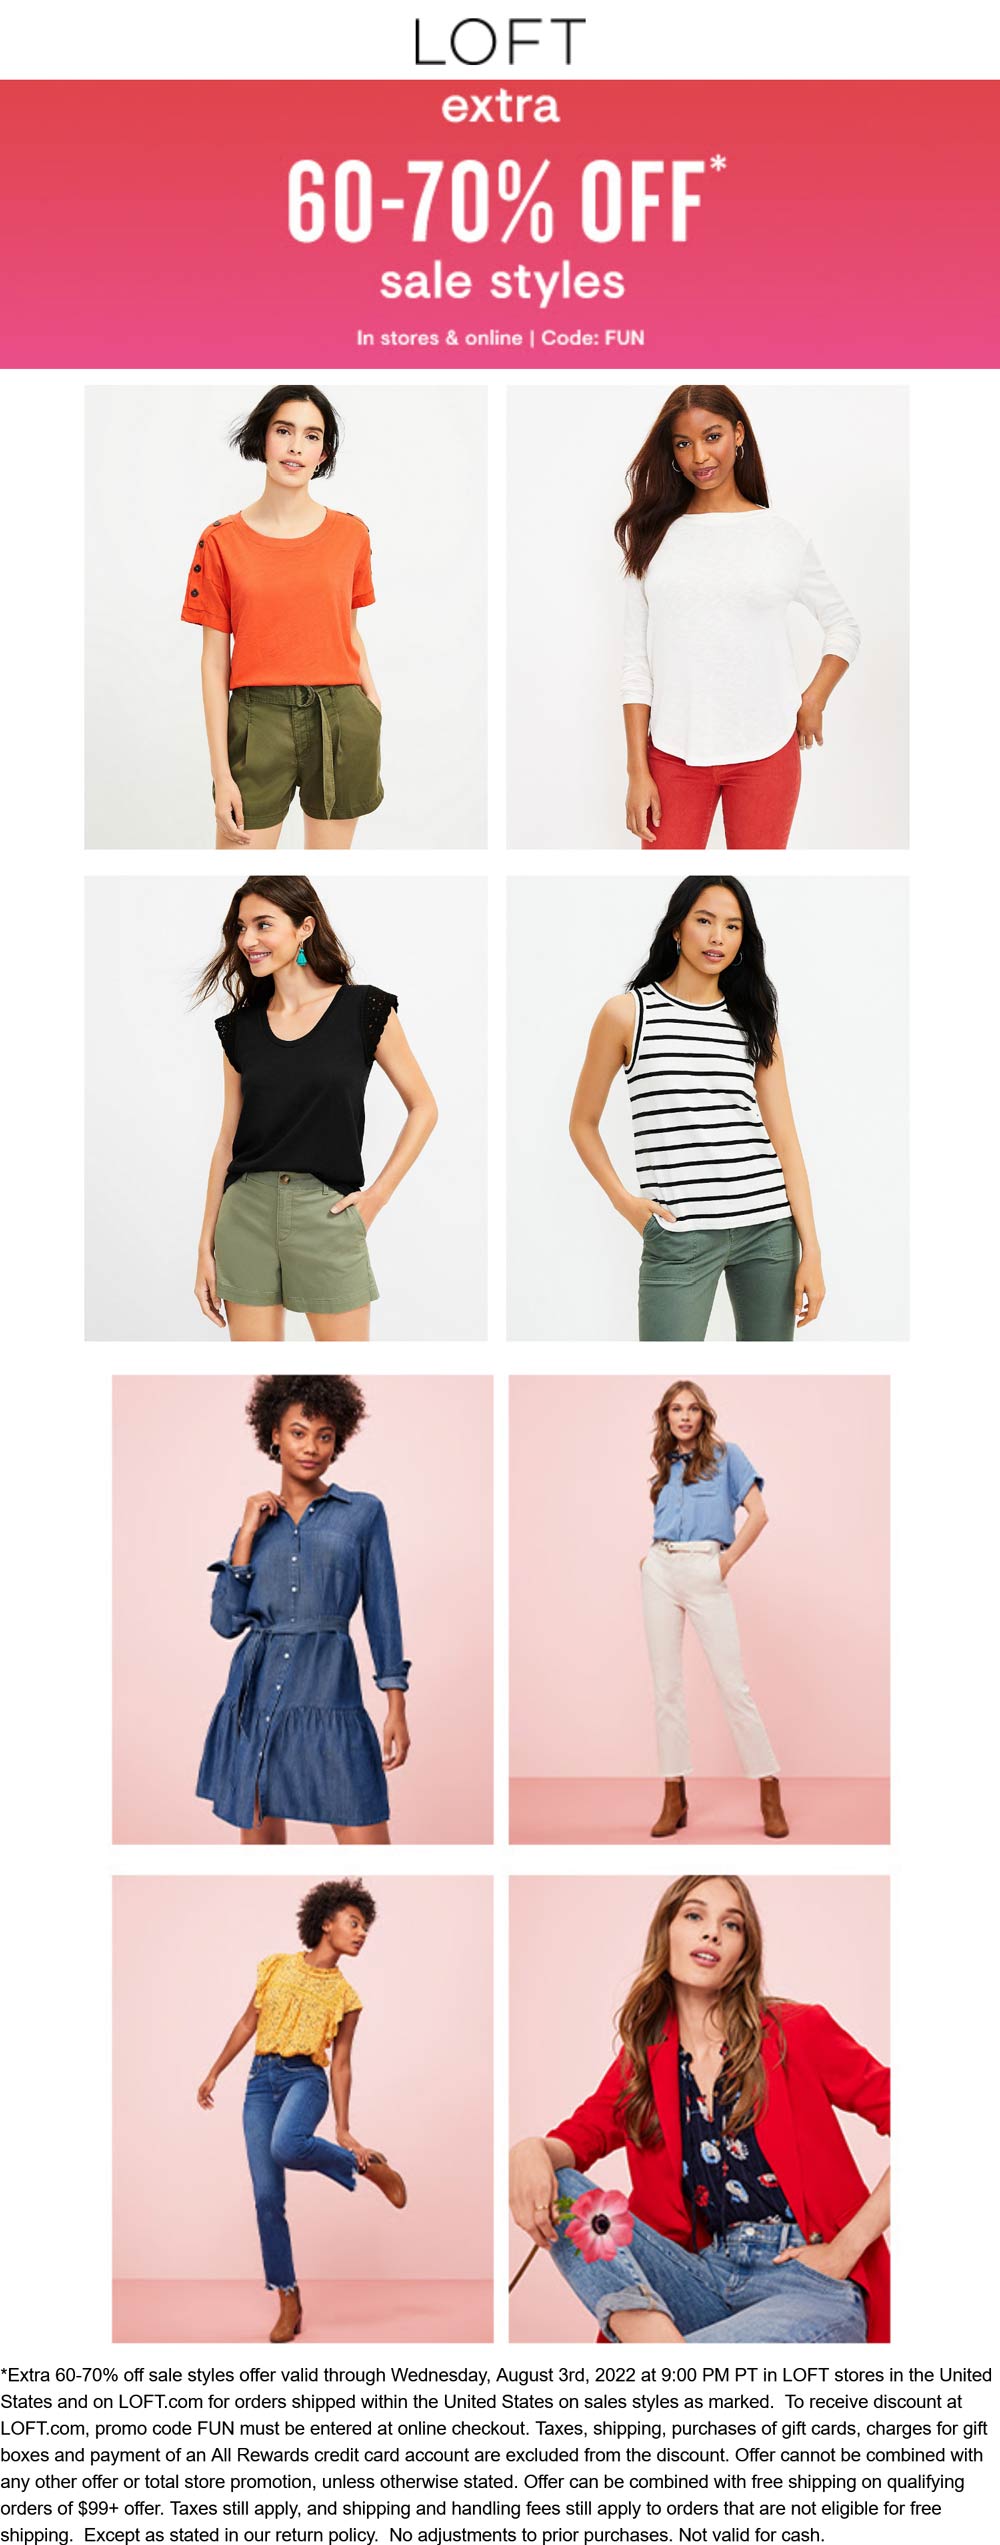 LOFT stores Coupon  Extra 60-70% off sale styles at LOFT, or online via promo code FUN #loft 